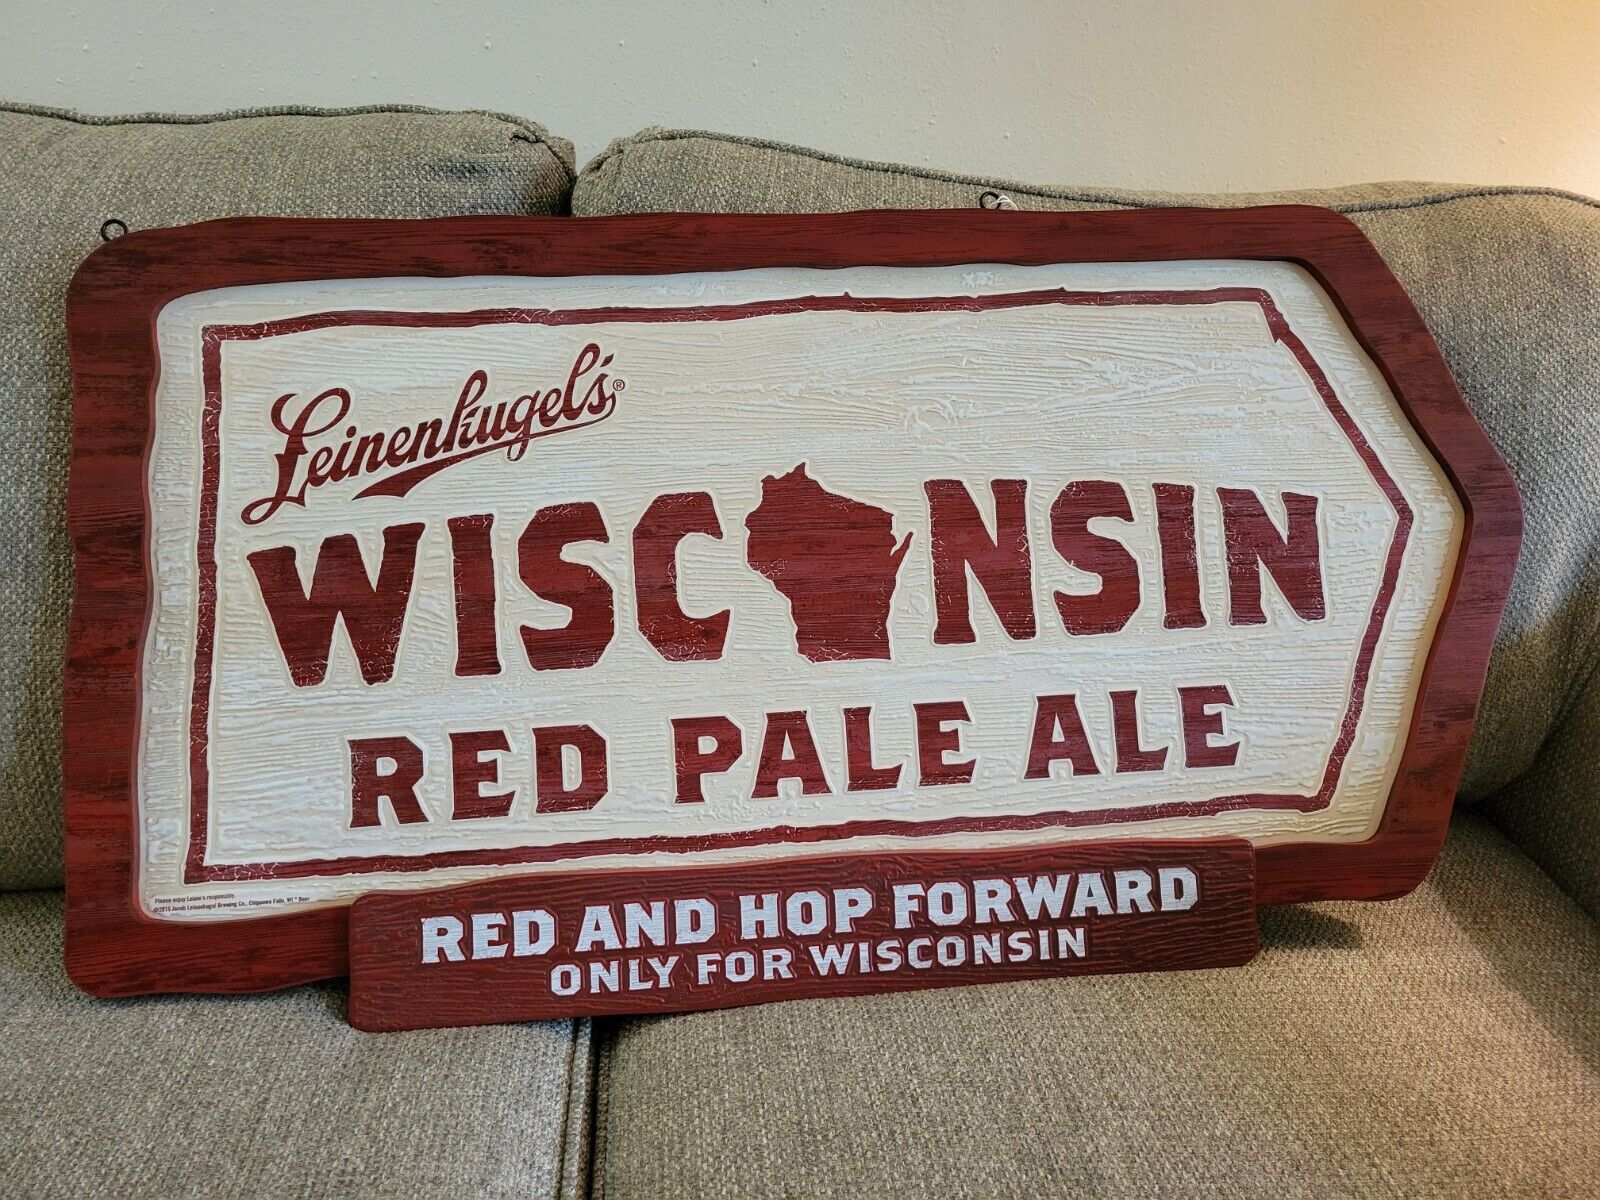 LEINENKUGEL'S WISCONSIN RED PALE ALE SIGN / BRAND NEW WOODEN SIGN